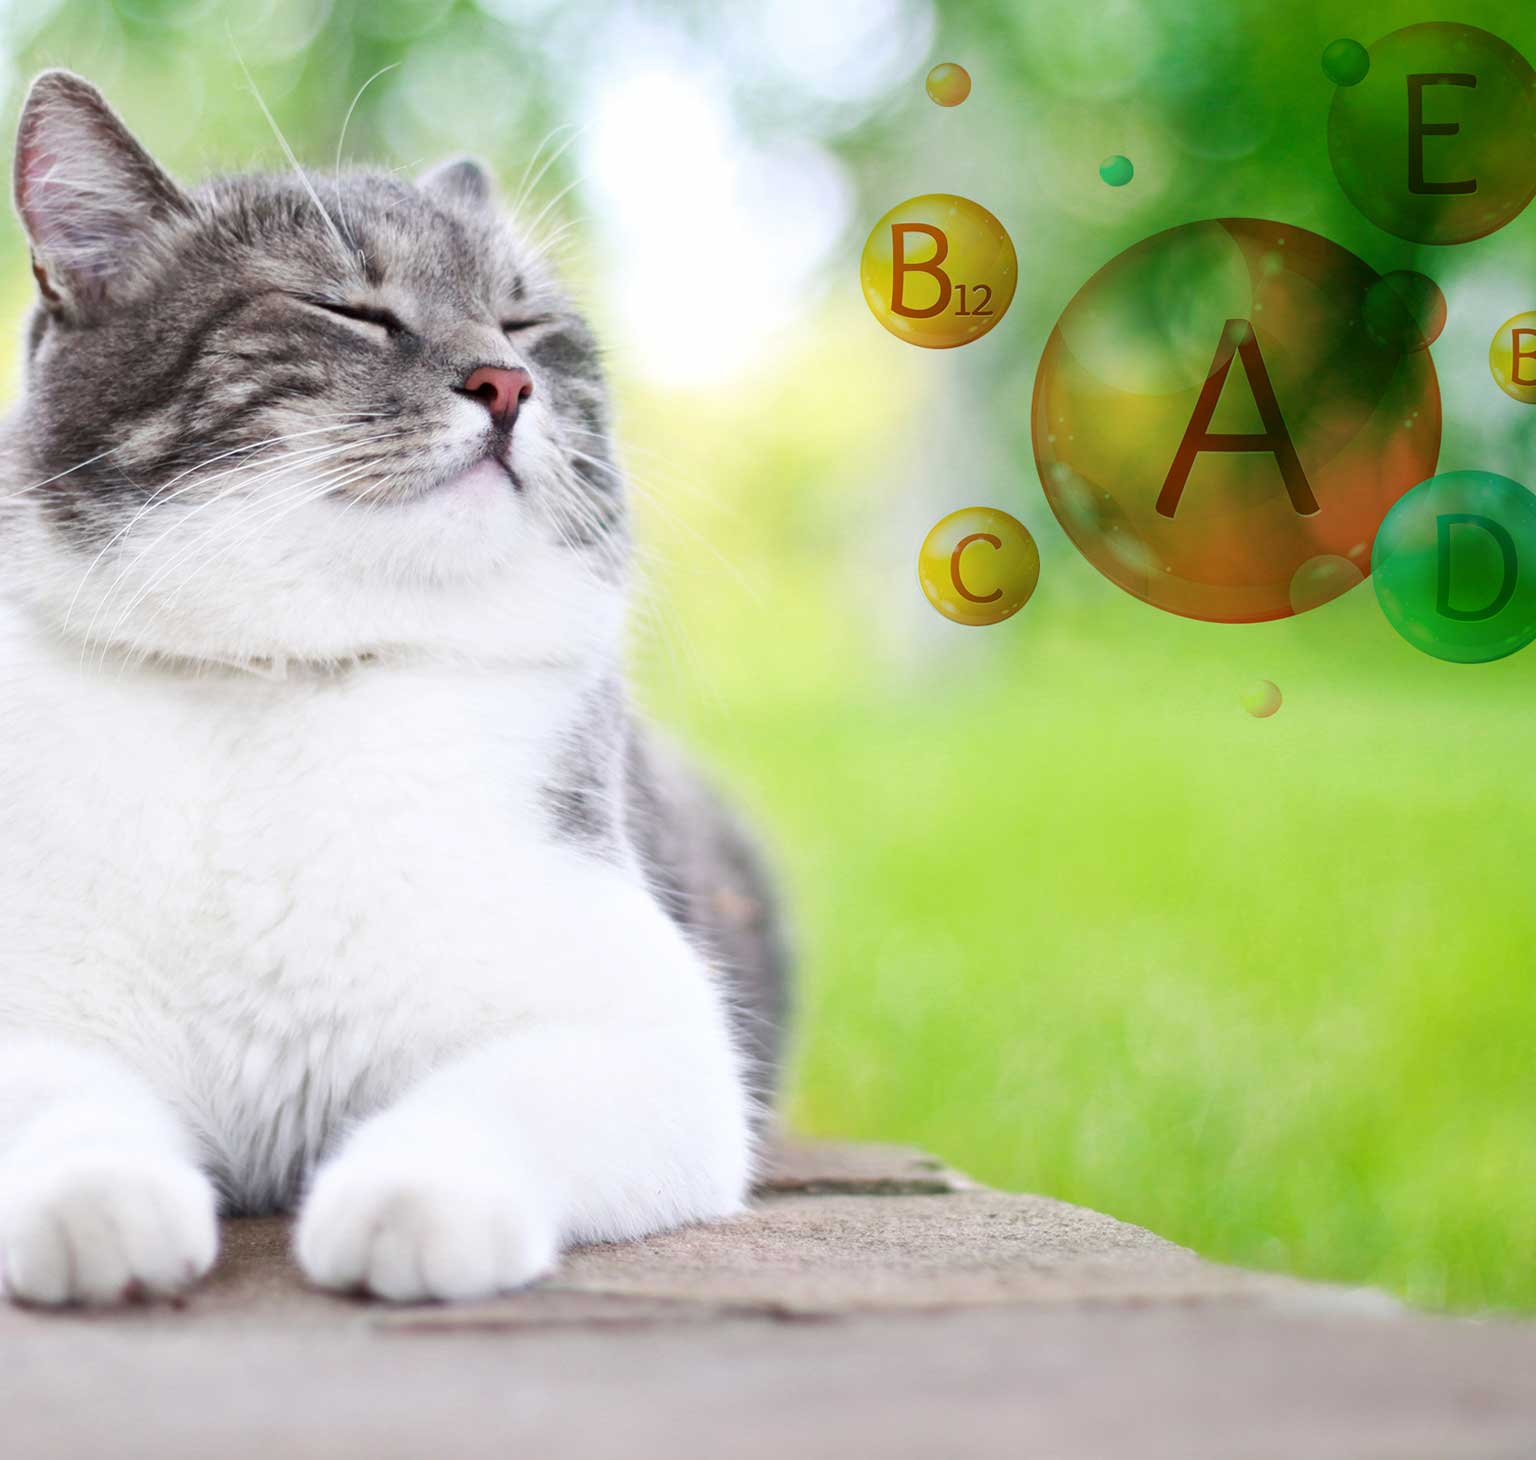 6 vitamins that are brilliant for your cat’s health